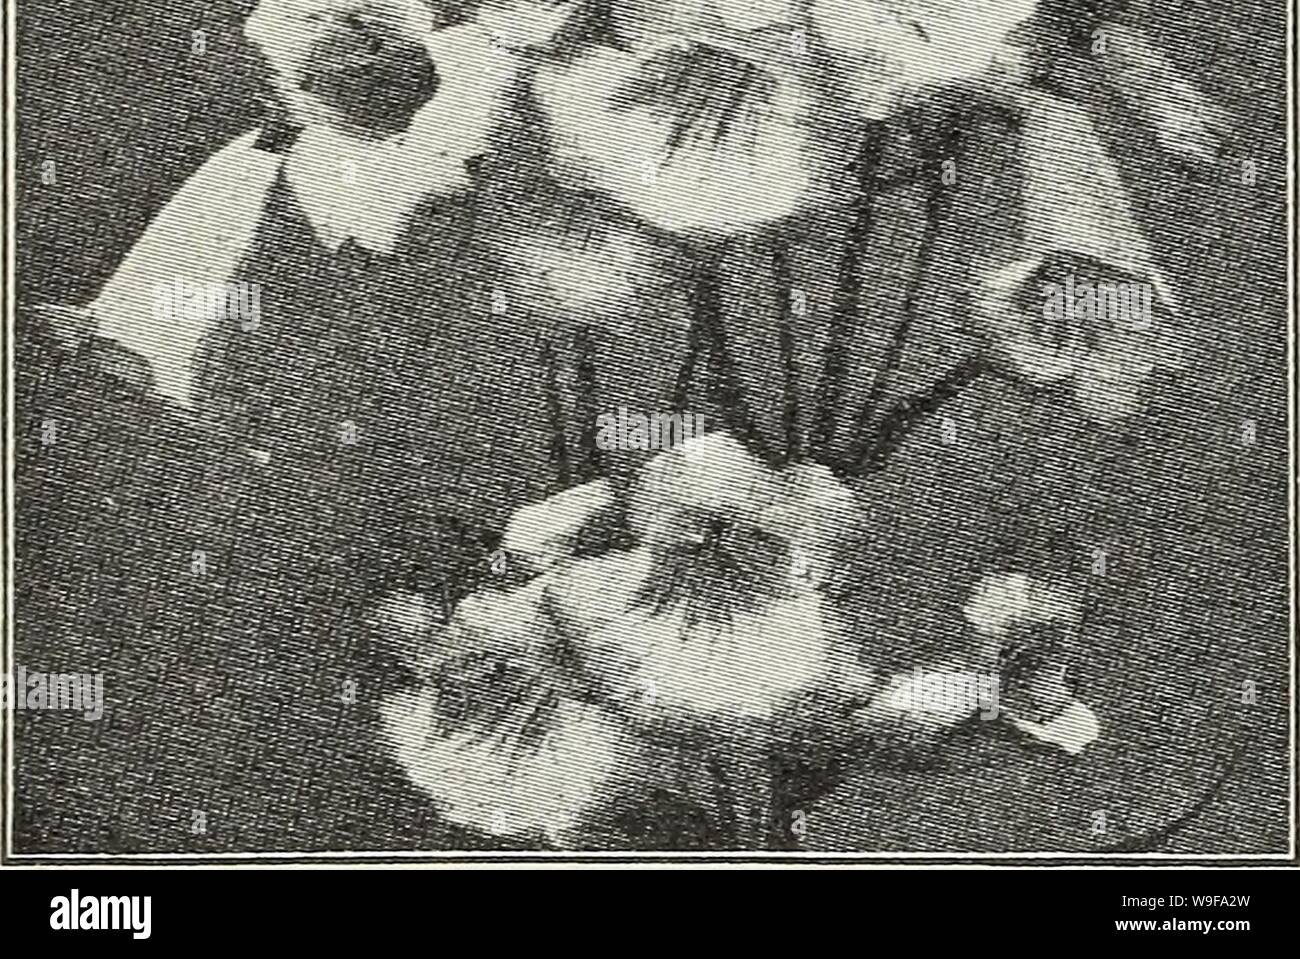 Archive image from page 25 of Currie's autumn 1929 54th year. Currie's autumn 1929 54th year bulbs and plants  curriesautumn19219curr Year: 1929 ( wBta ;     RANUNCULUS (Buttercup) Acris fl. pi.—Double golden-yellow flowers. Repens, fl. pi.—A creeping variety with golden-yellow flowers. Price, each, 25c; per doz., 2.50. RUDEBECKIA (Cone Flowers) Fulgida—Orange yellow with black center. Golden Glow—Grows 6 feet high, bearing masses of double golden-yellow flowers. Purpurea—Large, reddish-purple flowers with brown cone. Price, each, 25c; per dozen, 2.50. SALVIA (Meadow Sage) Azurea Grandiflora—B Stock Photo